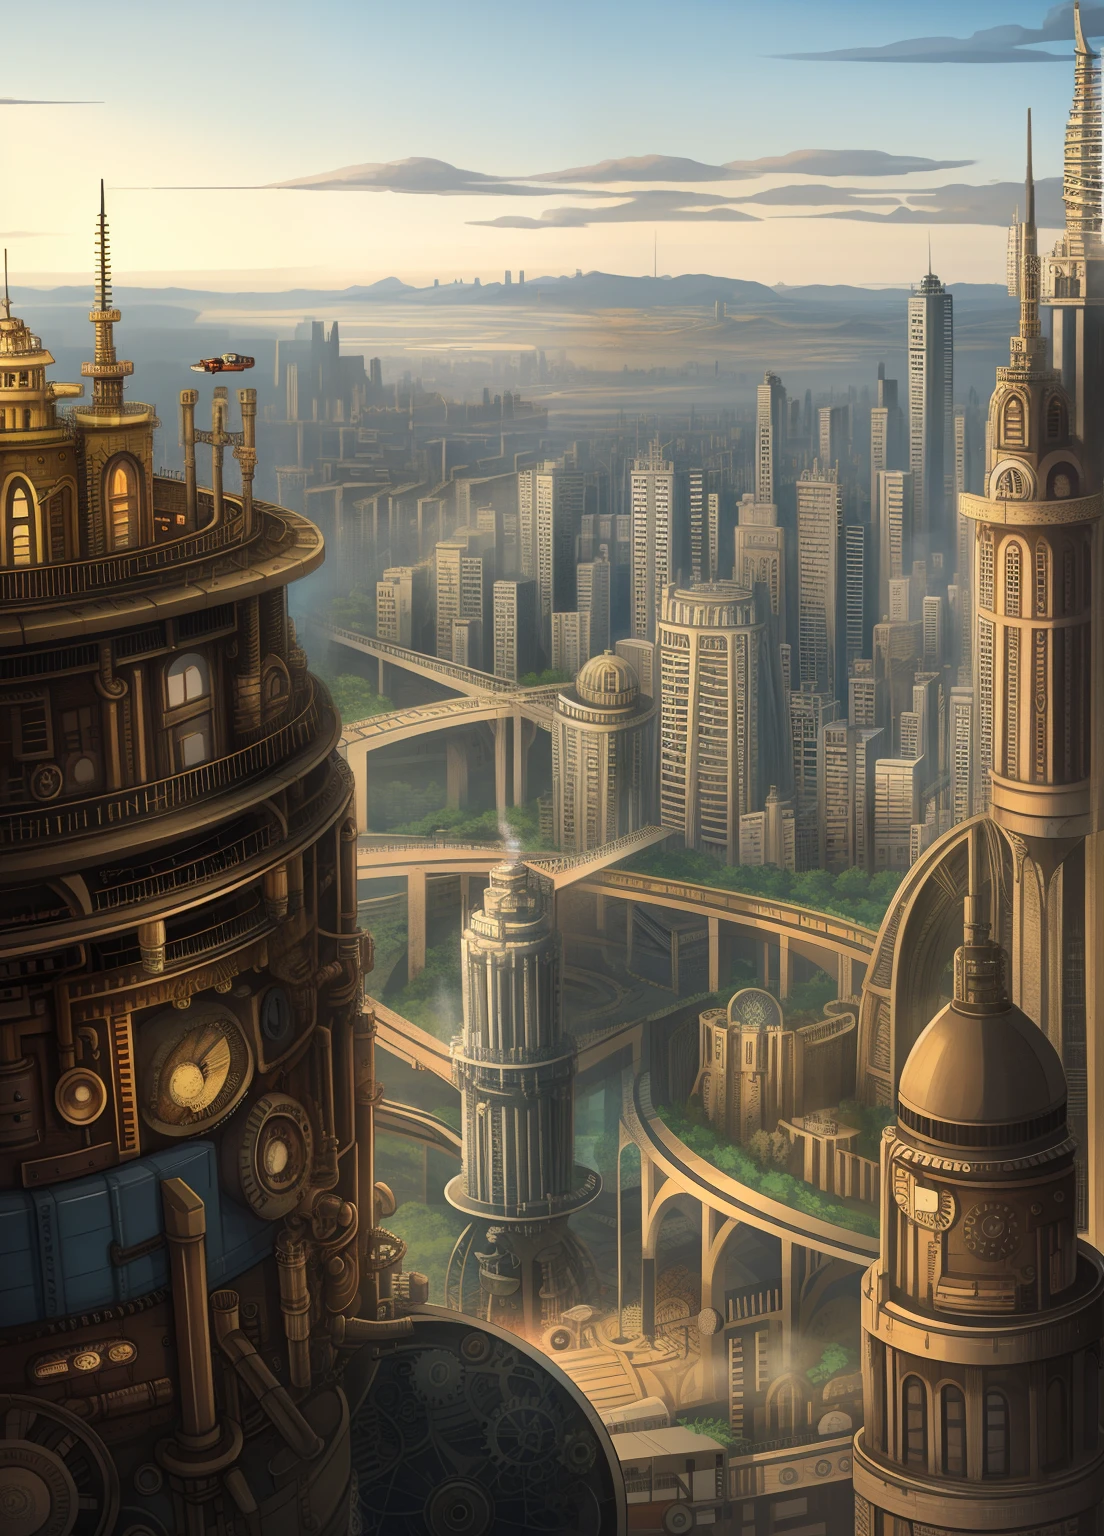 A densely populated steam-punk cityscape filled with various gears and pipes.